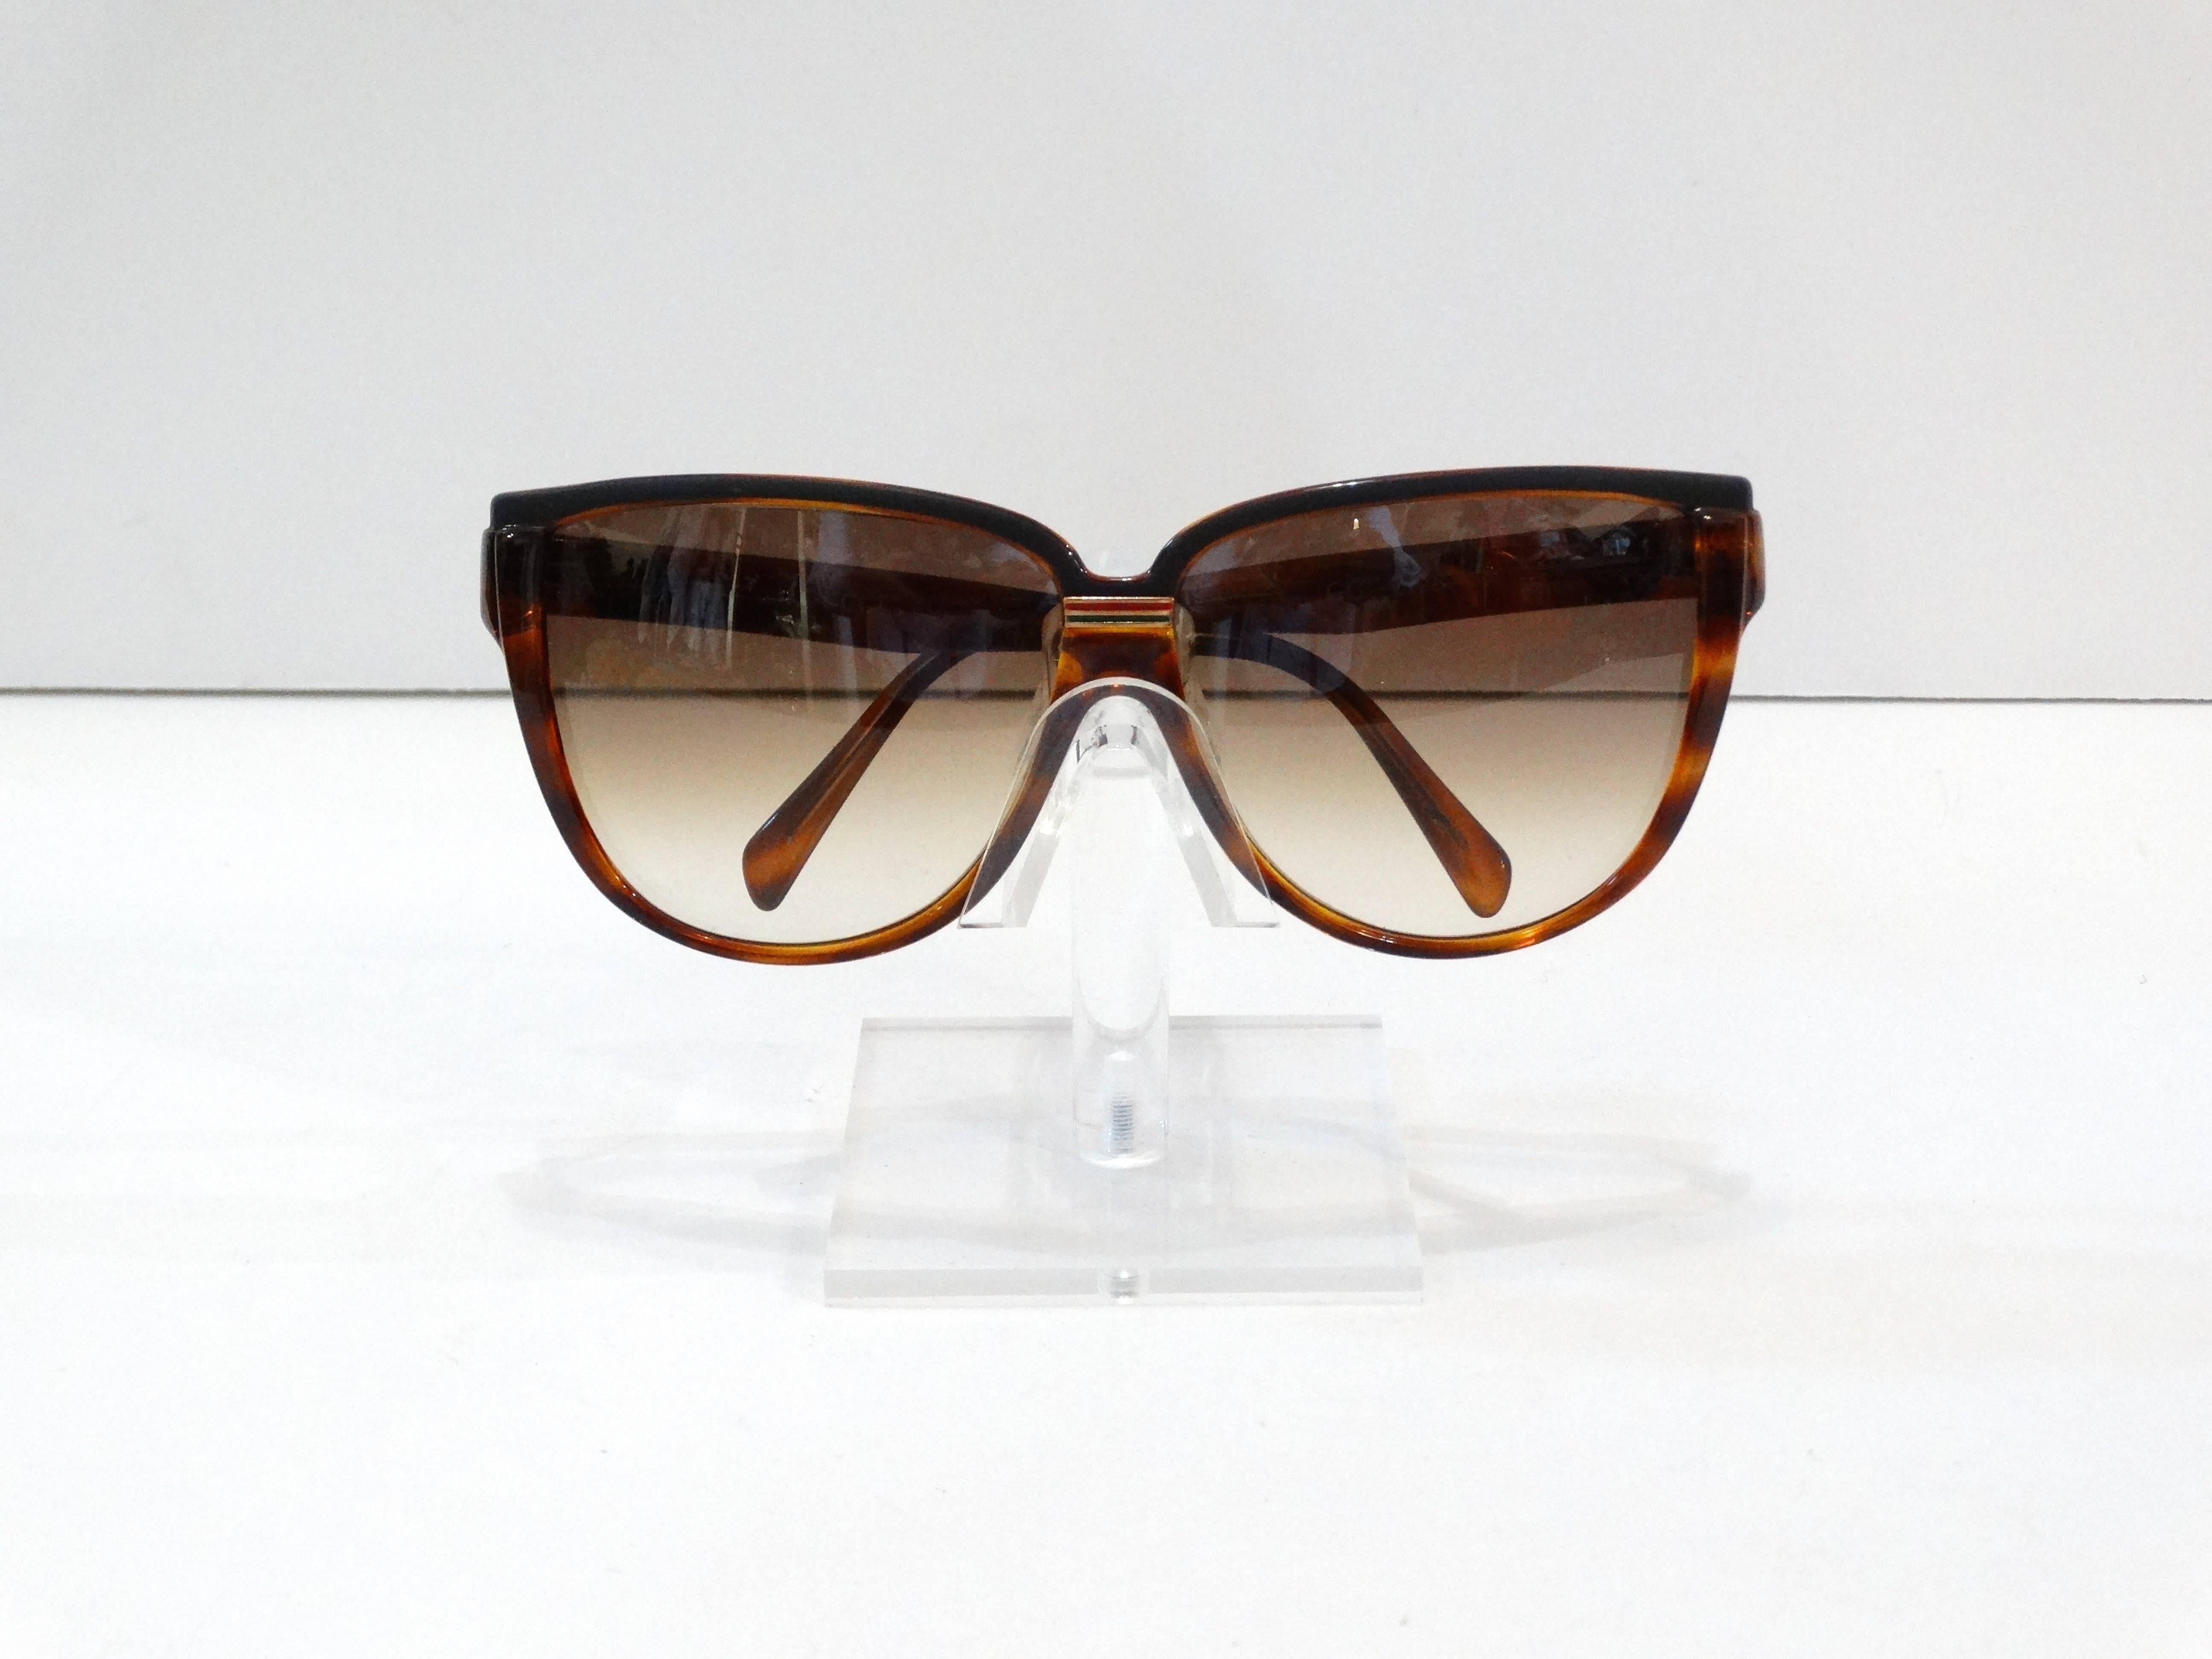 Wear Gucci- everybody's doing it! Peep these fabulous 1980s Gucci oversized sunglasses in tortoise shell! Lenses ombre tinted, accented with red and green stripe between the eyes. Gucci “GG”at either side of the arms. Black rim along the top.